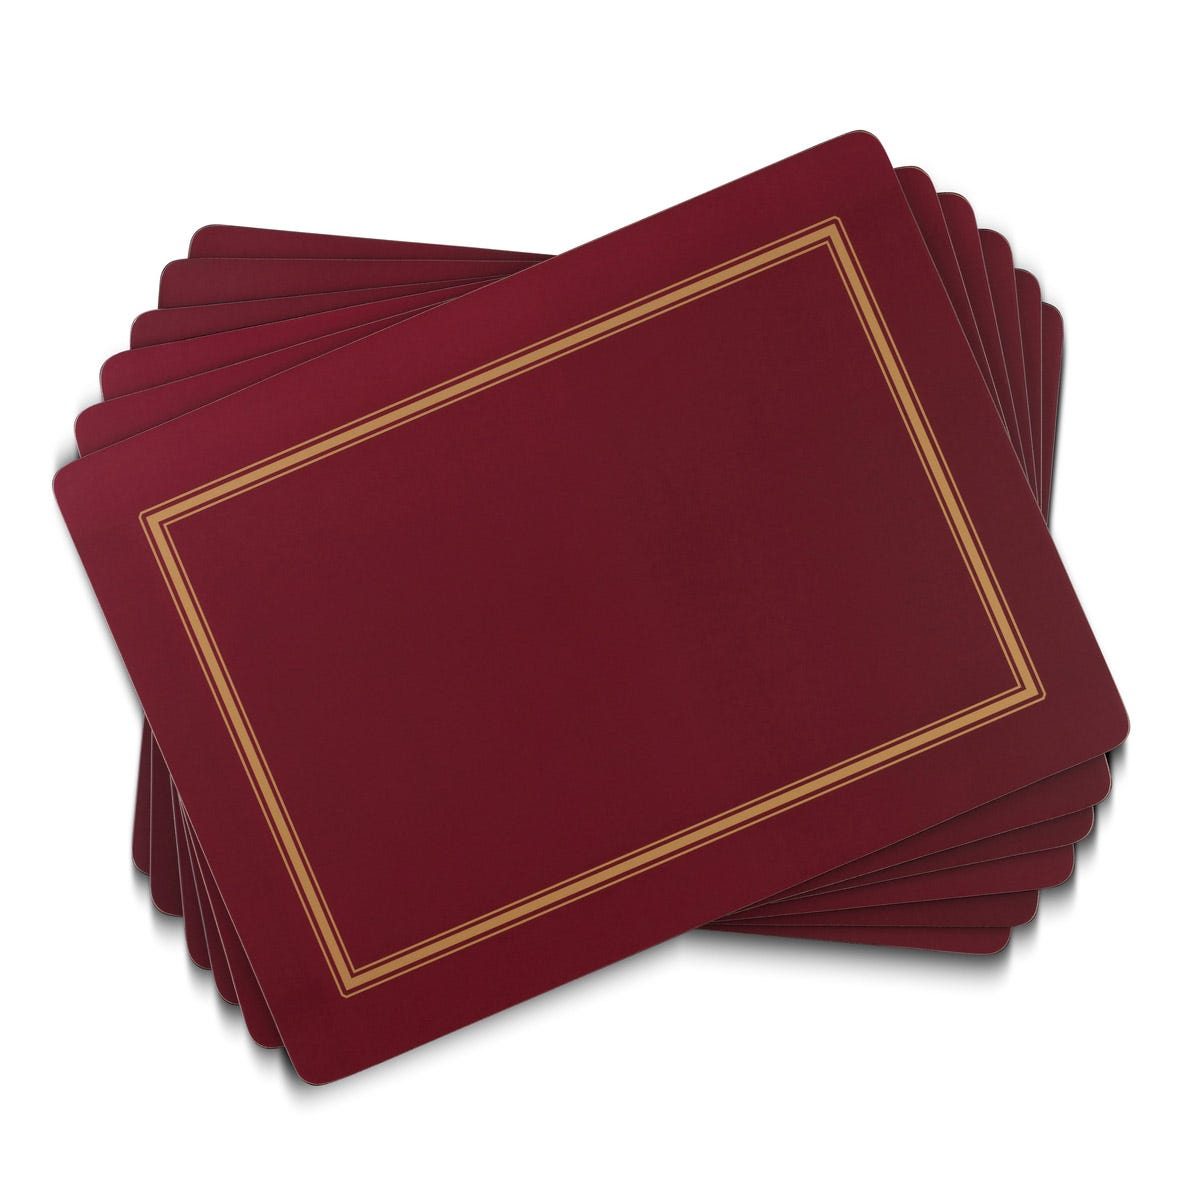 Classic Burgundy Set of 6 Placemats